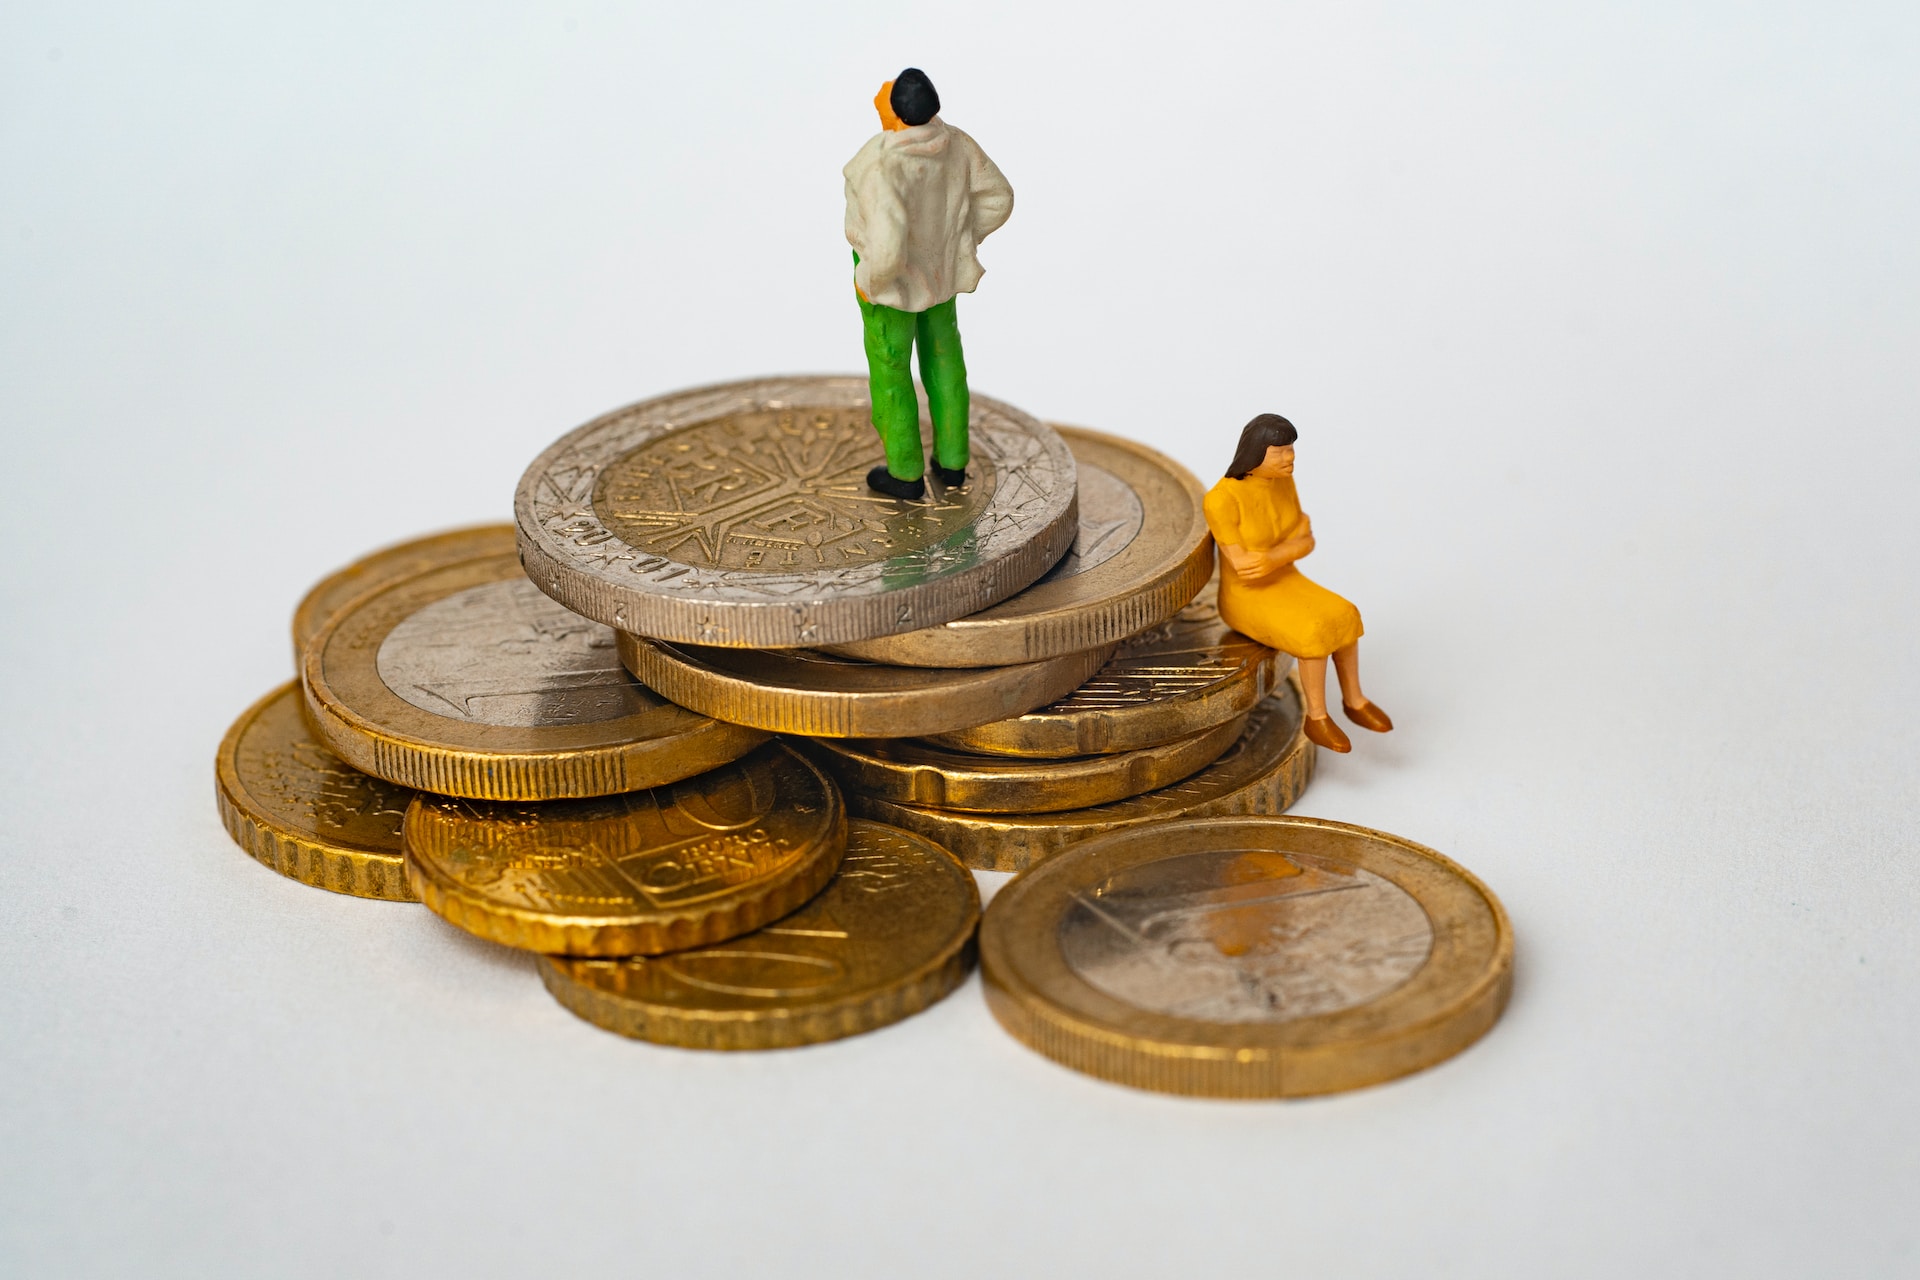 image of small figurines standing on a pile of coins | LSEG and Oracle